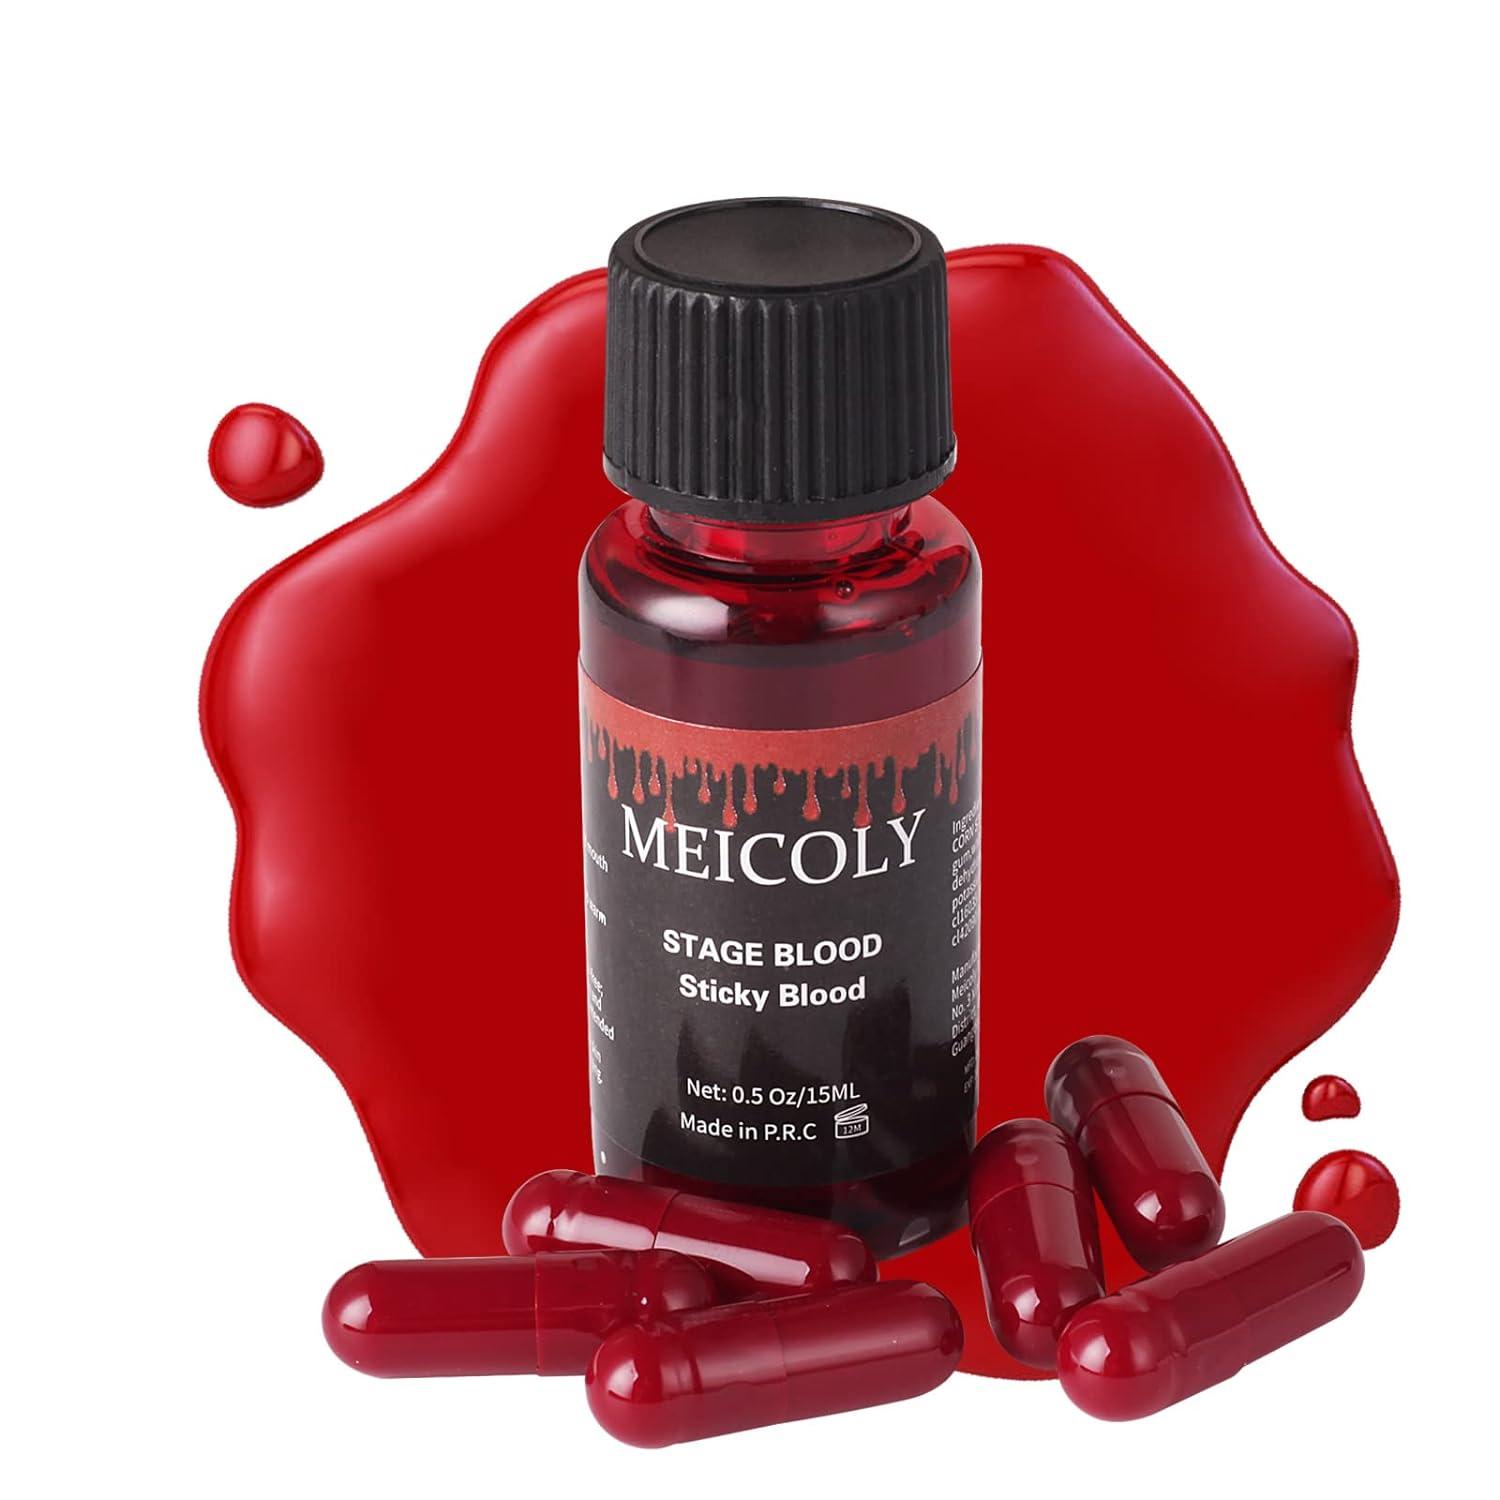 MEICOLY Fake Blood Washable,Edible Stage Blood,0.5 oz Realistic Drips  Sticky Fake Blood with Brush,Safe for  Mouth,Teeth,Nosebleed,Halloween,Cosplay,Scar,Wound SFX Makeup,Special  Effects,Dark 0.5 oz stage blood,dark